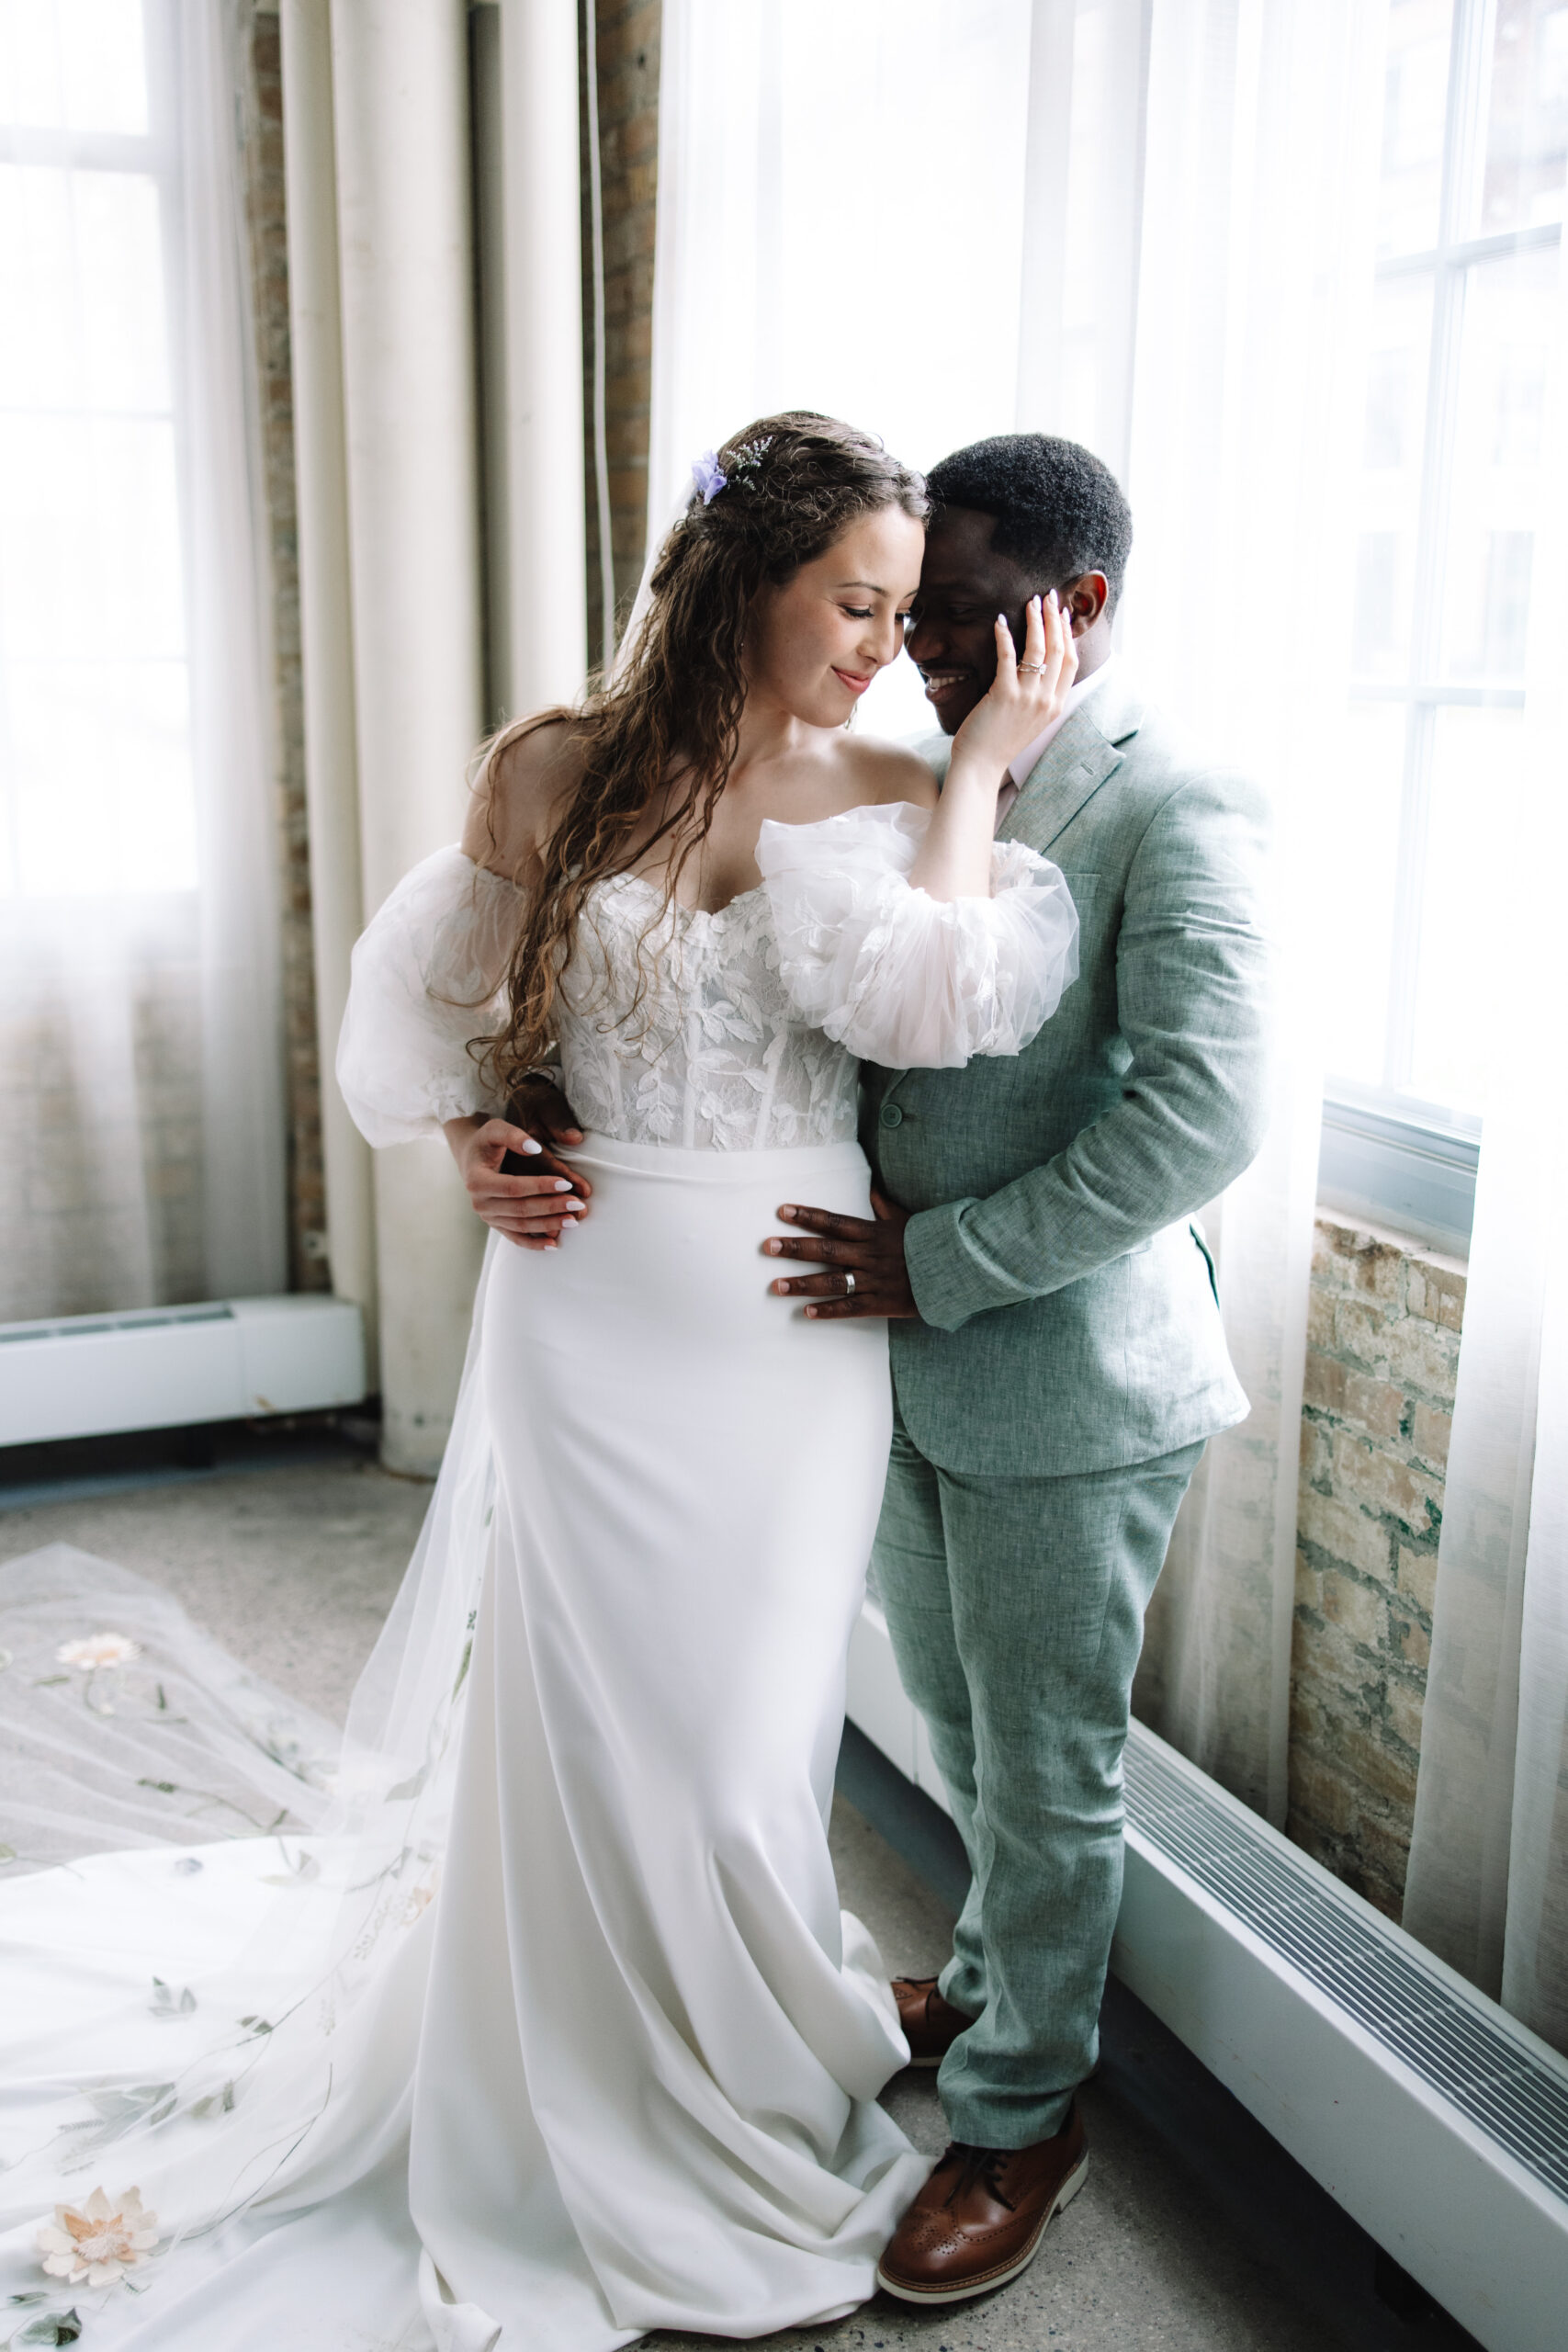 A bride and groom embrace lovingly near a window, the bride in a white dress and the groom in a gray suit.